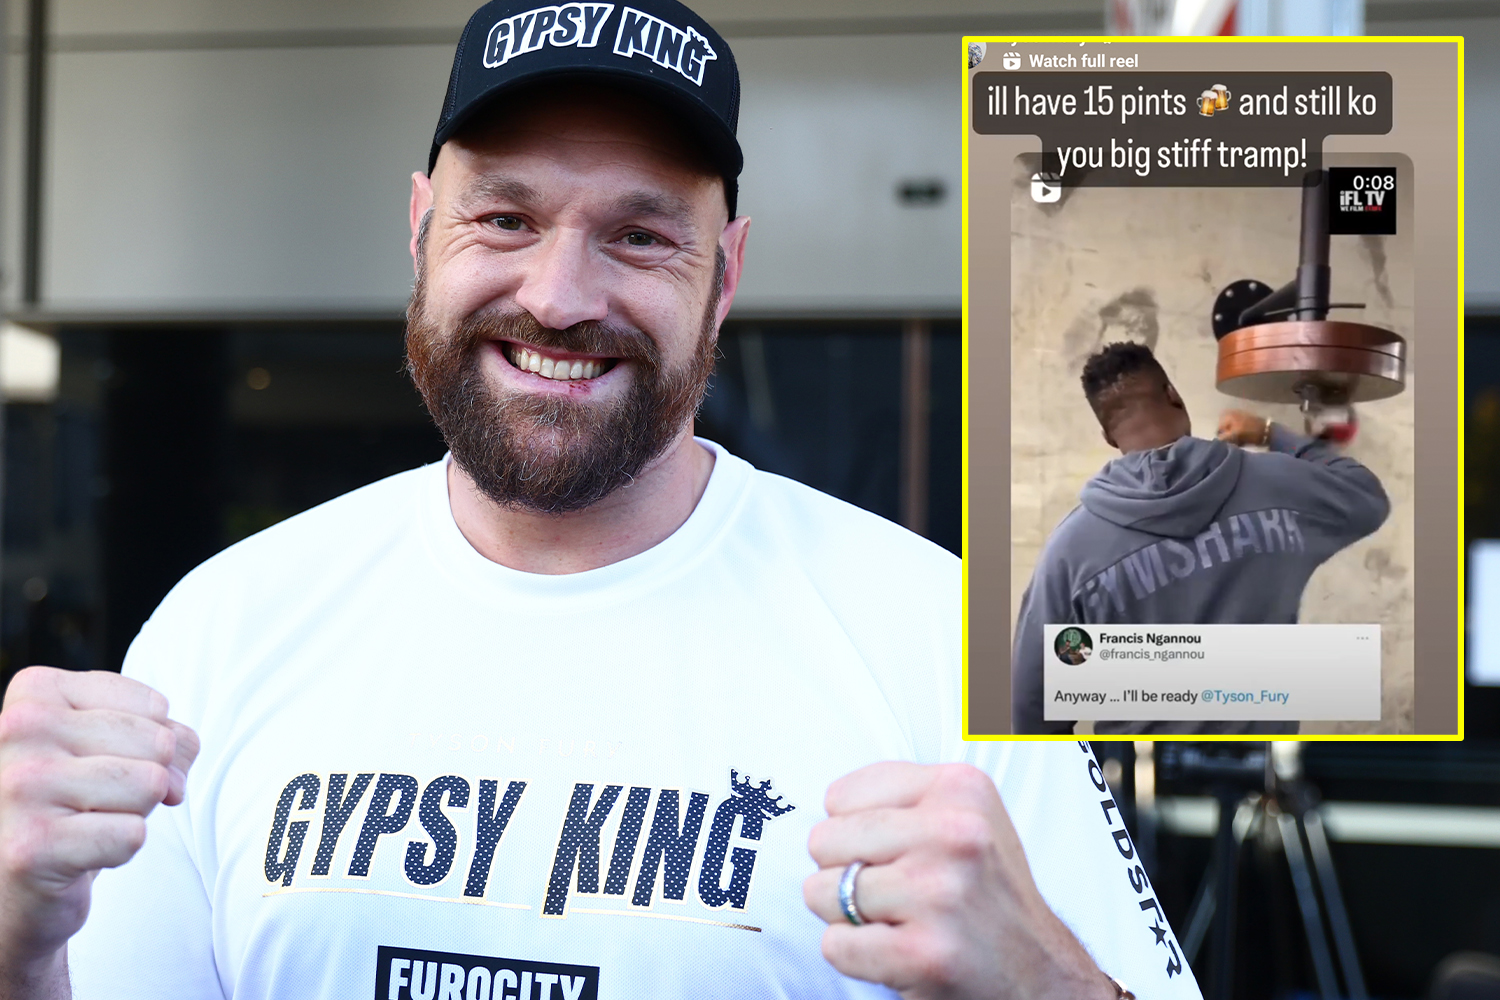 Tyson Fury says he could knock Francis Ngannou out after 15 pints in cheeky dig at UFC icon